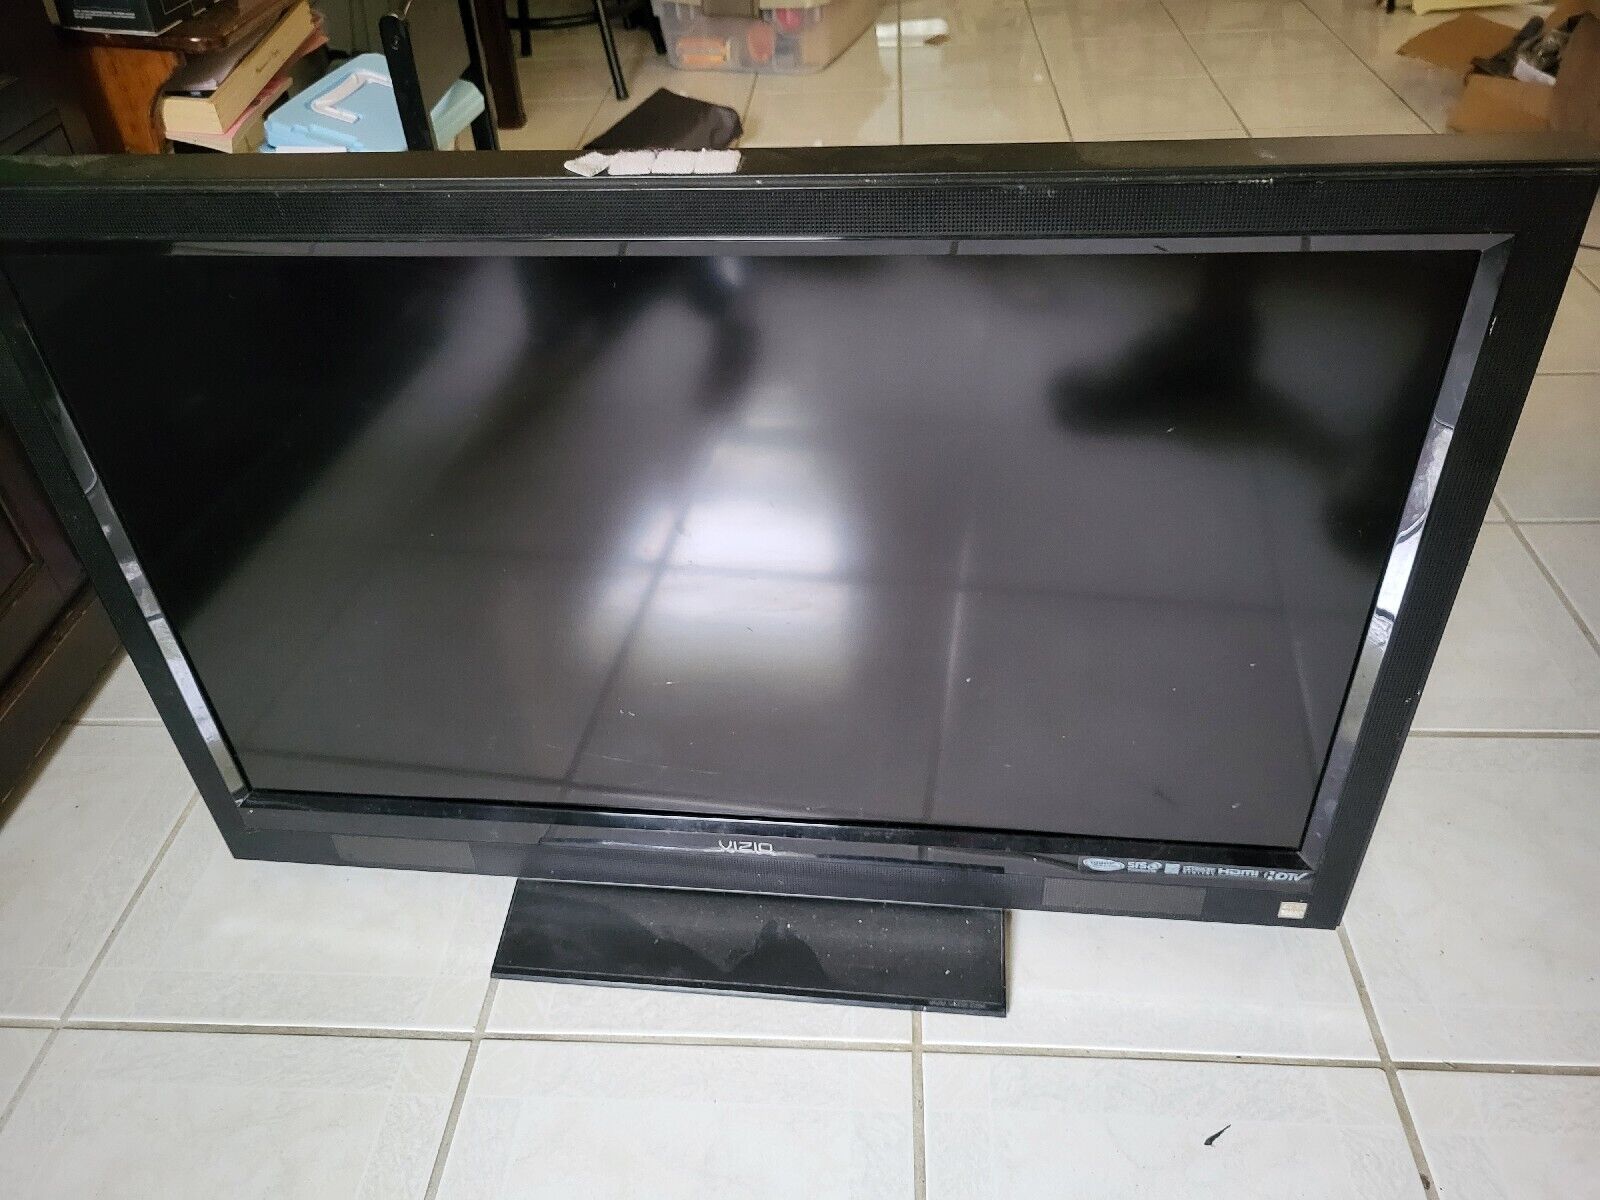 vizio vo370m Hd 37 Inch Tv Television Flat Screen Working. Available Now for $80.00